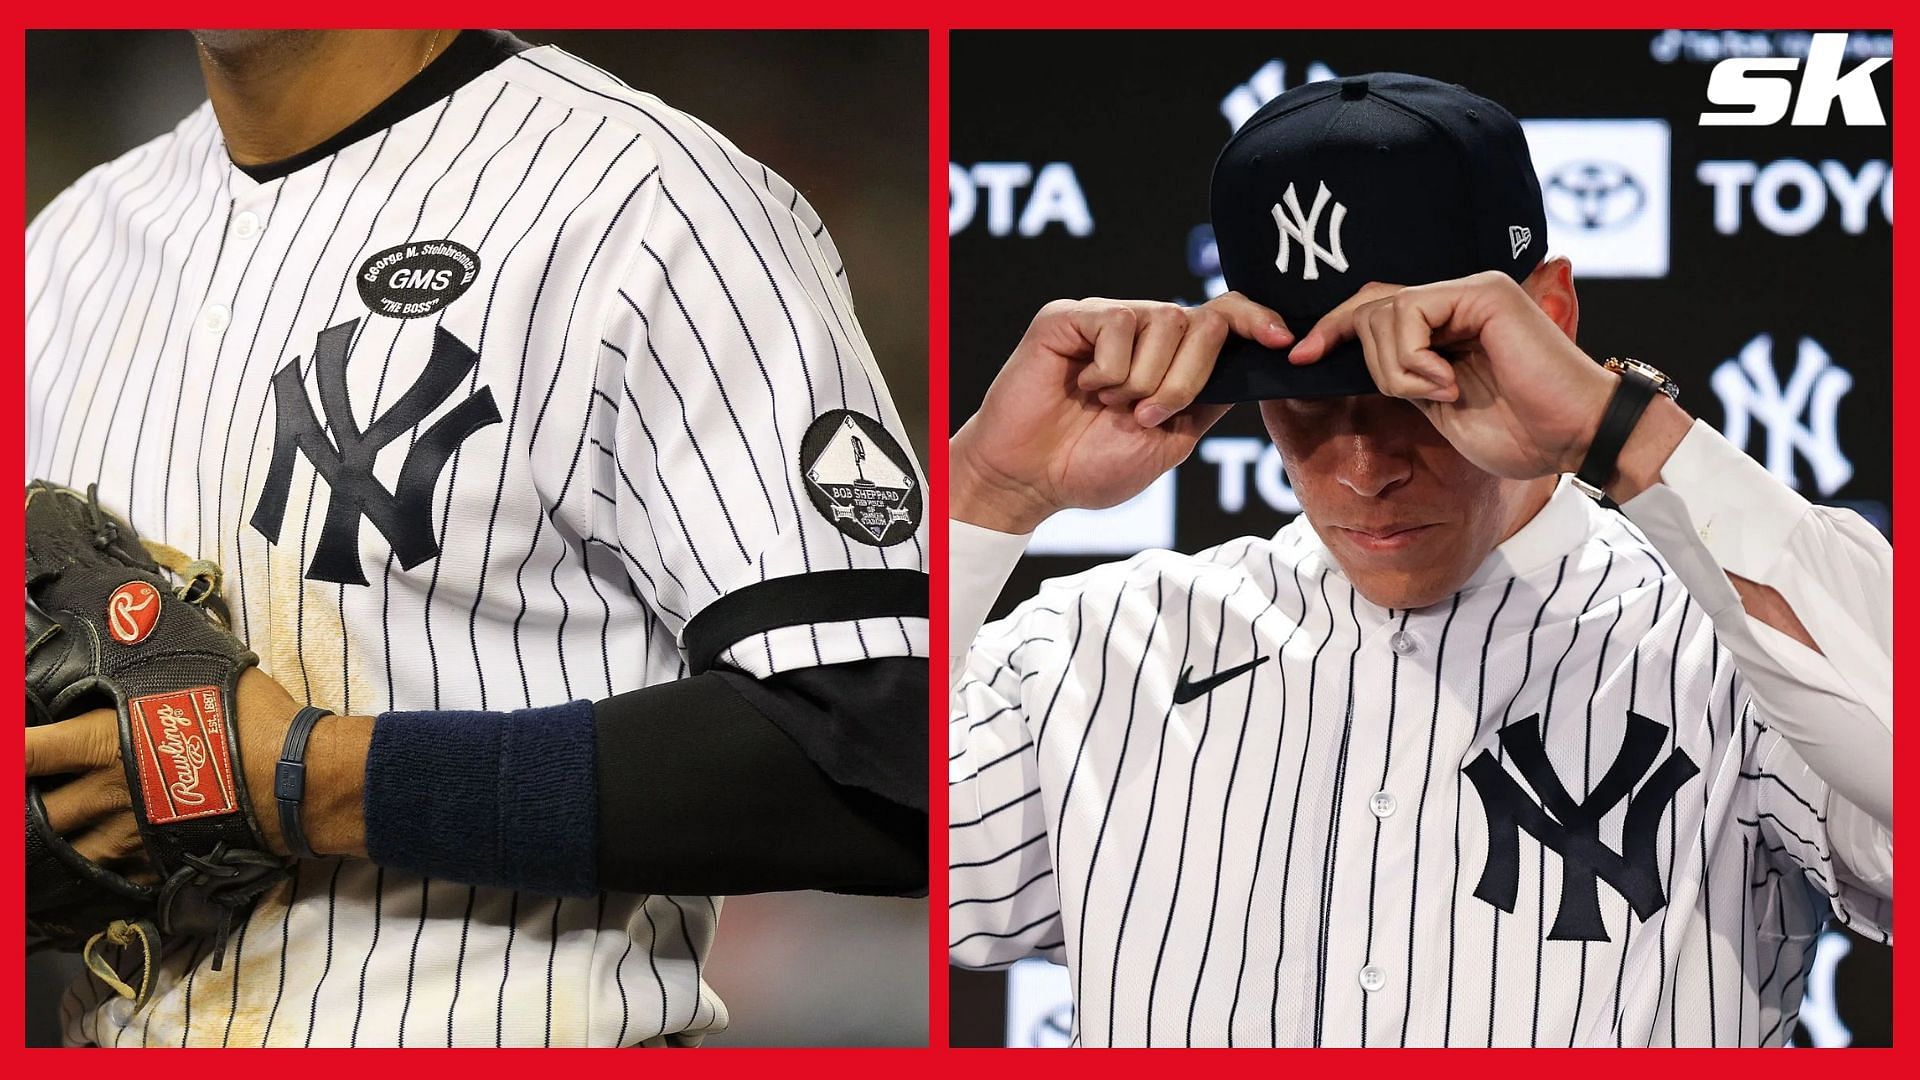 Yankees] Our home and away uniforms with the Starr Insurance patch